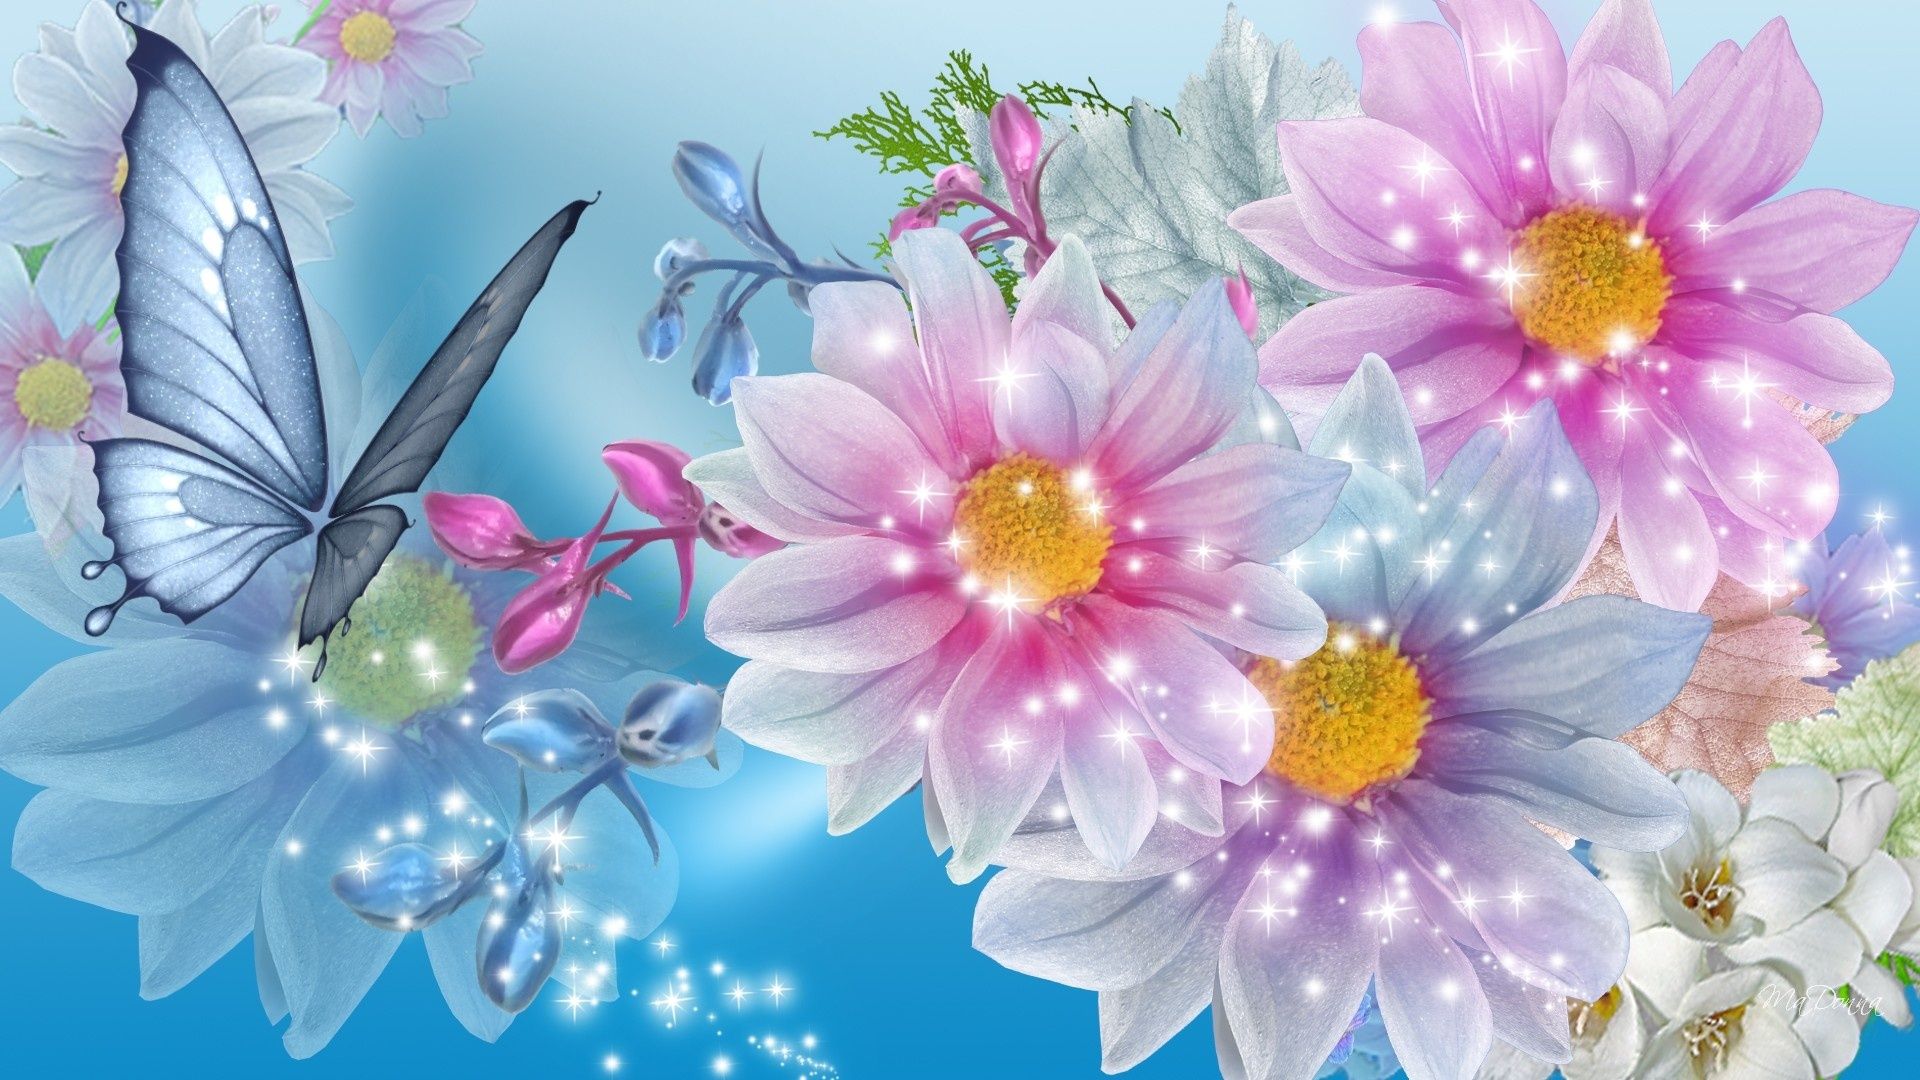 477 Flower HD Wallpapers Backgrounds - Wallpaper Abyss